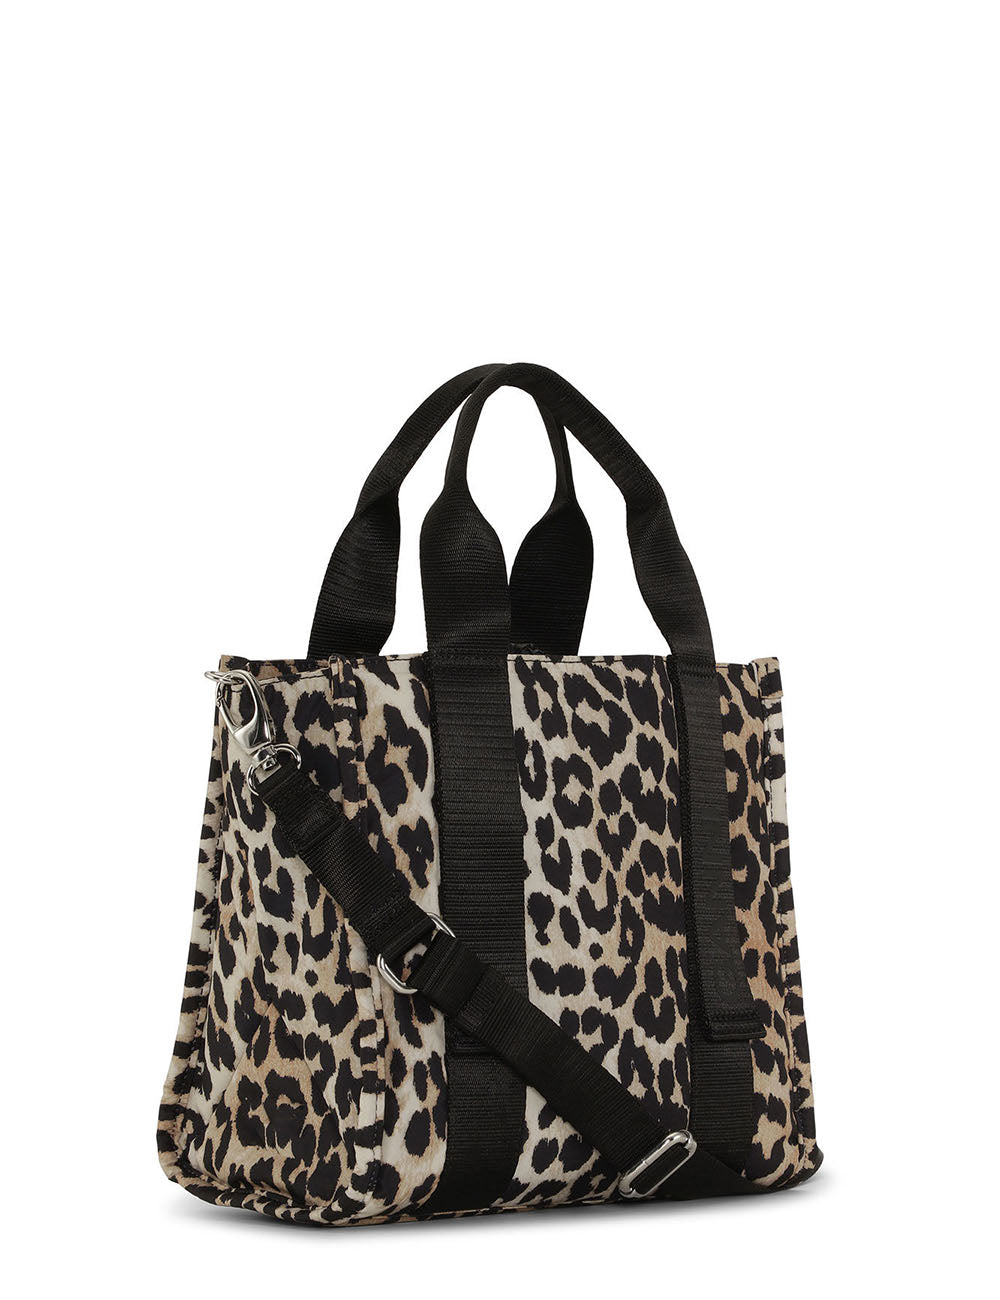 GANNI RECYCLED TECH SMALL TOTE PRINT